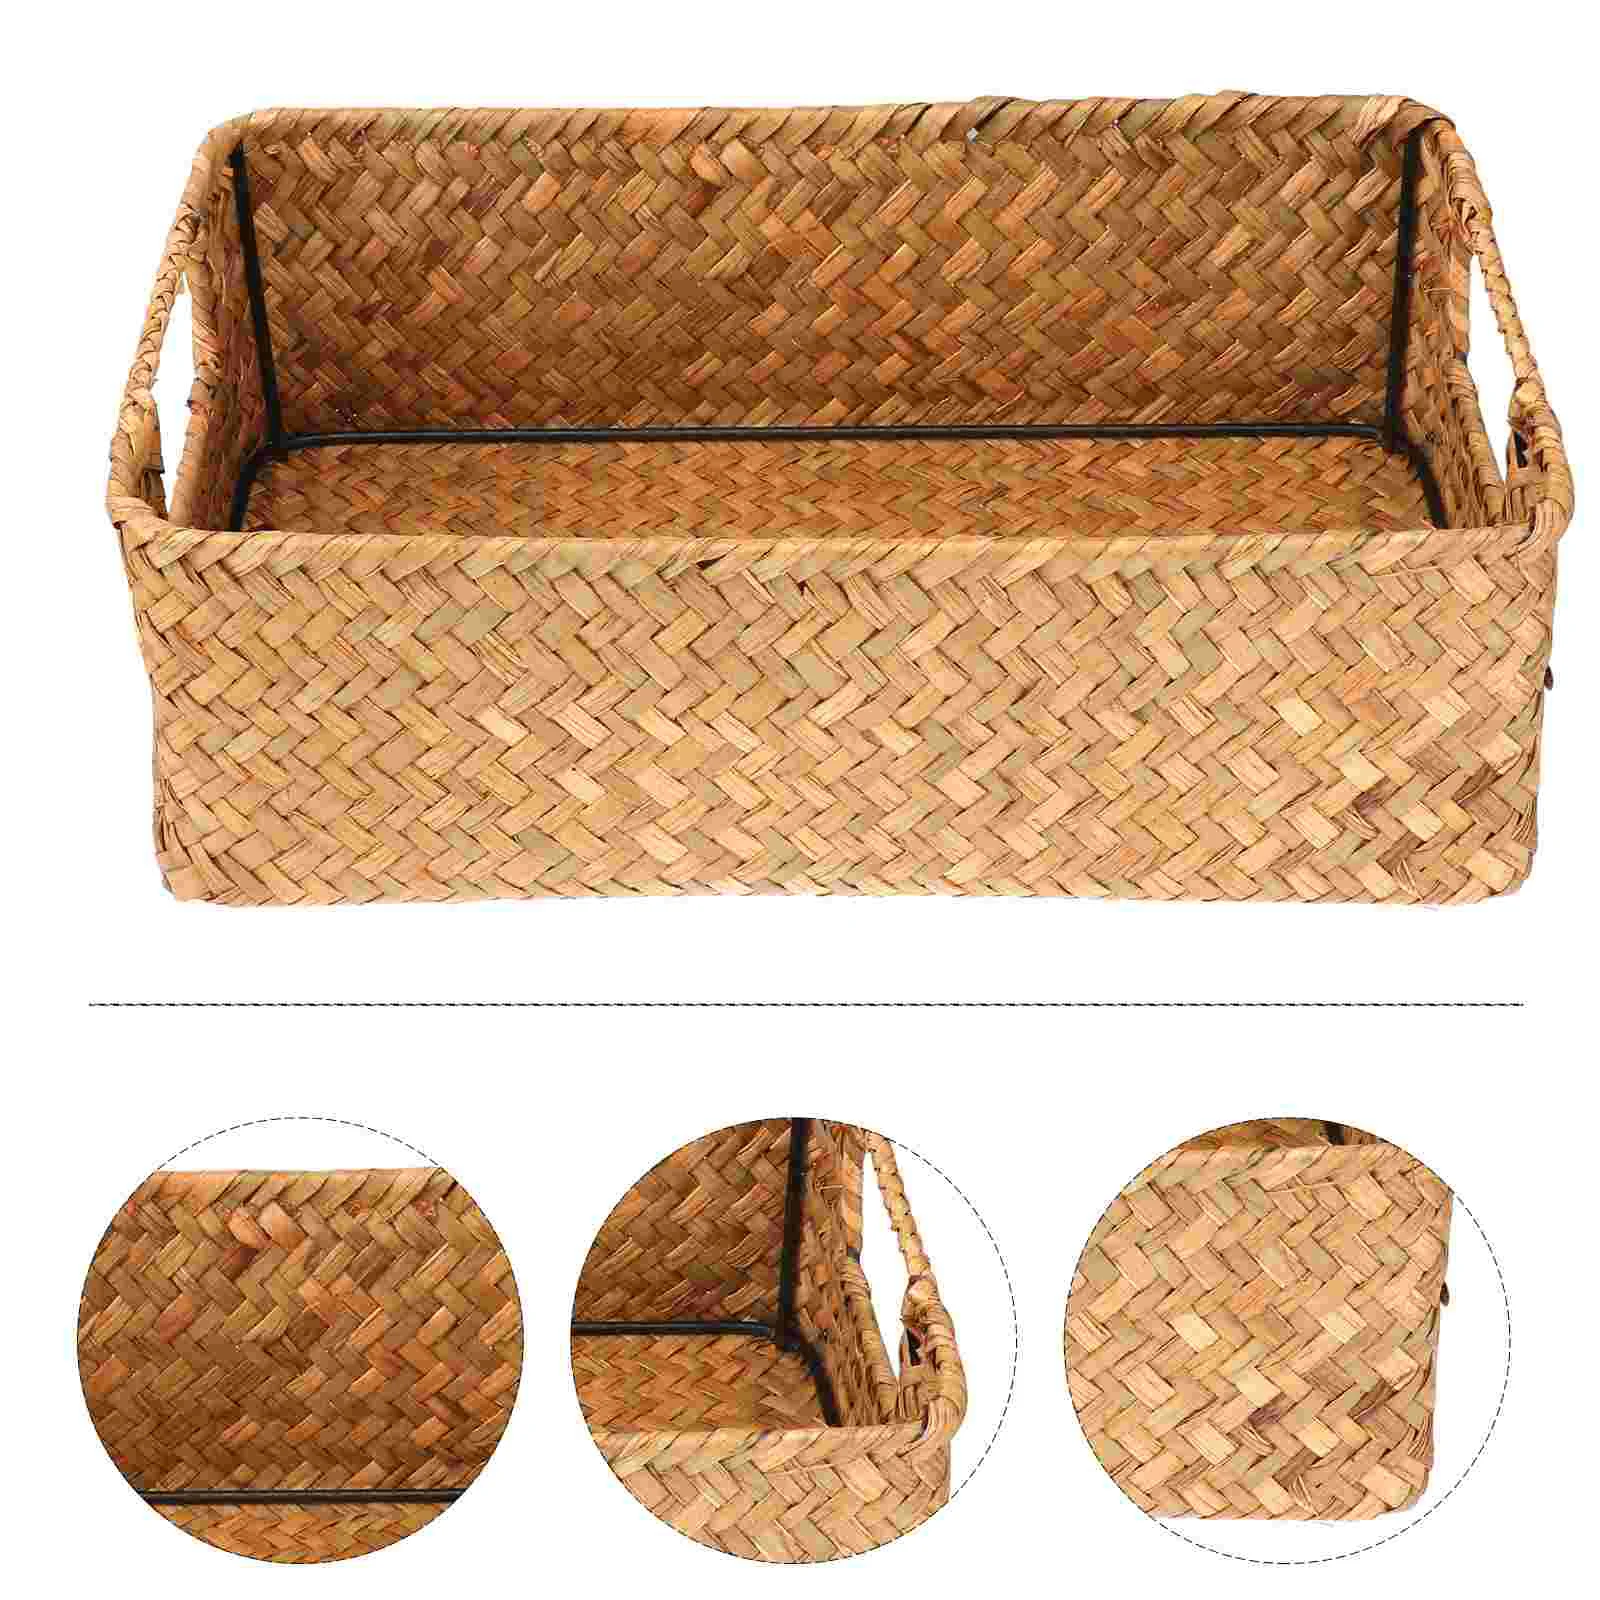 

Water Hyacinth Storage Baskets Rectangular Wicker Baskets with Handles for Cupboards Drawer Closet Bathroom Rustic Decor